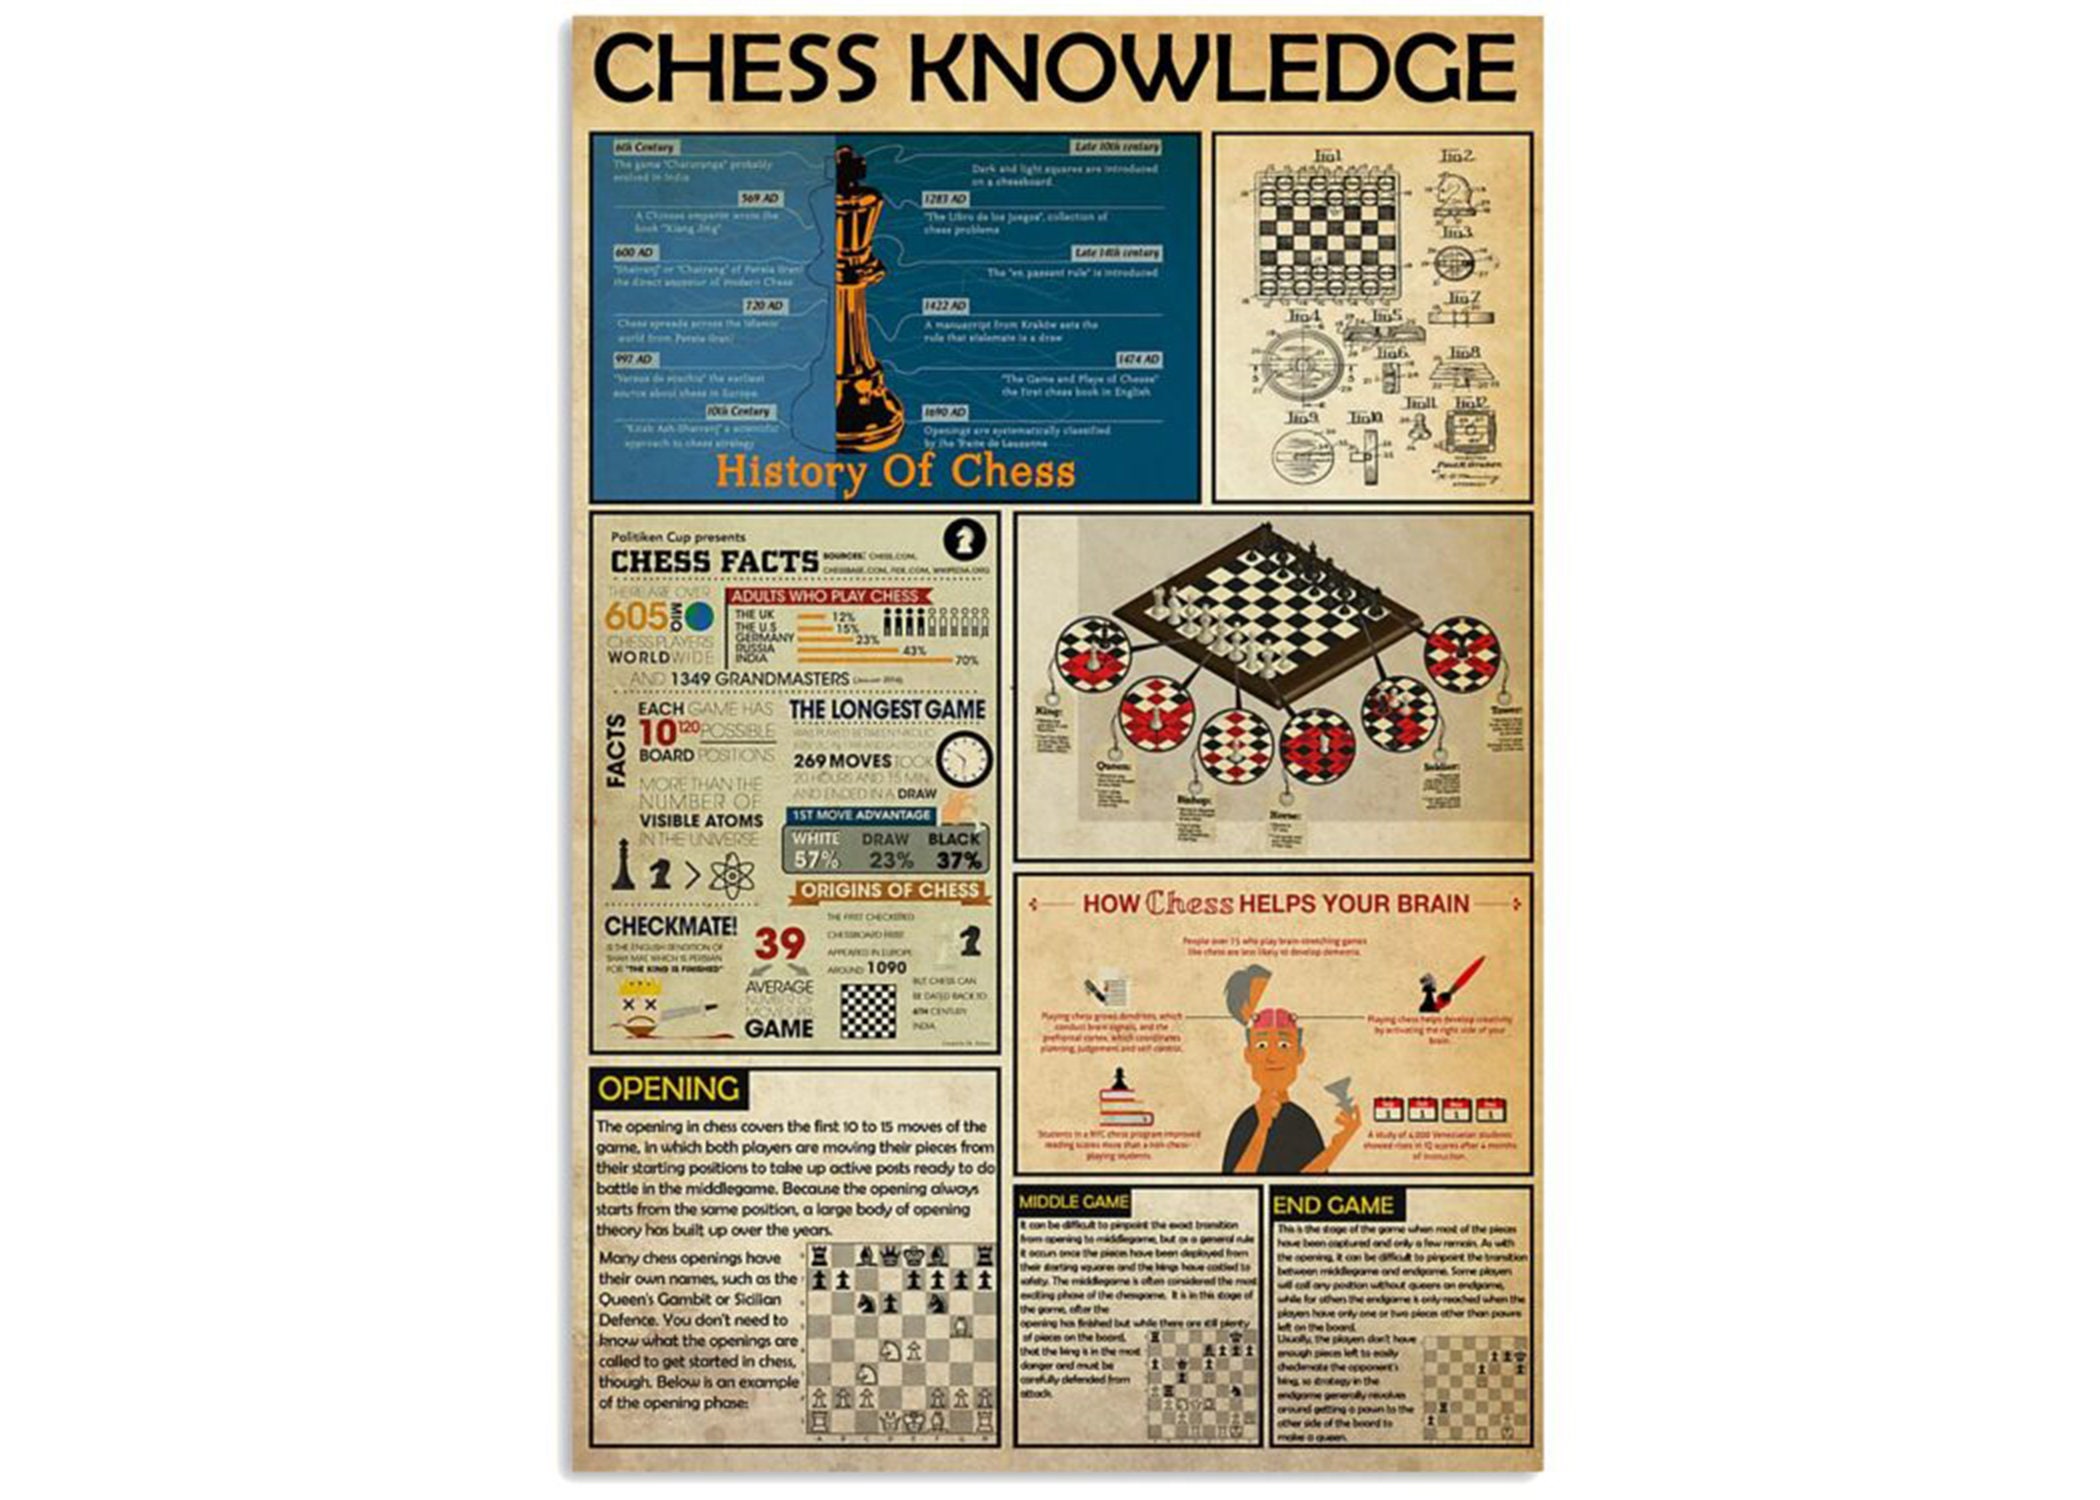 Chess Board Set up Rules & Piece Movement Strategy Cheat Sheet Laminated  Double Sided - Great for Beginners and Improving Your Chess Game!